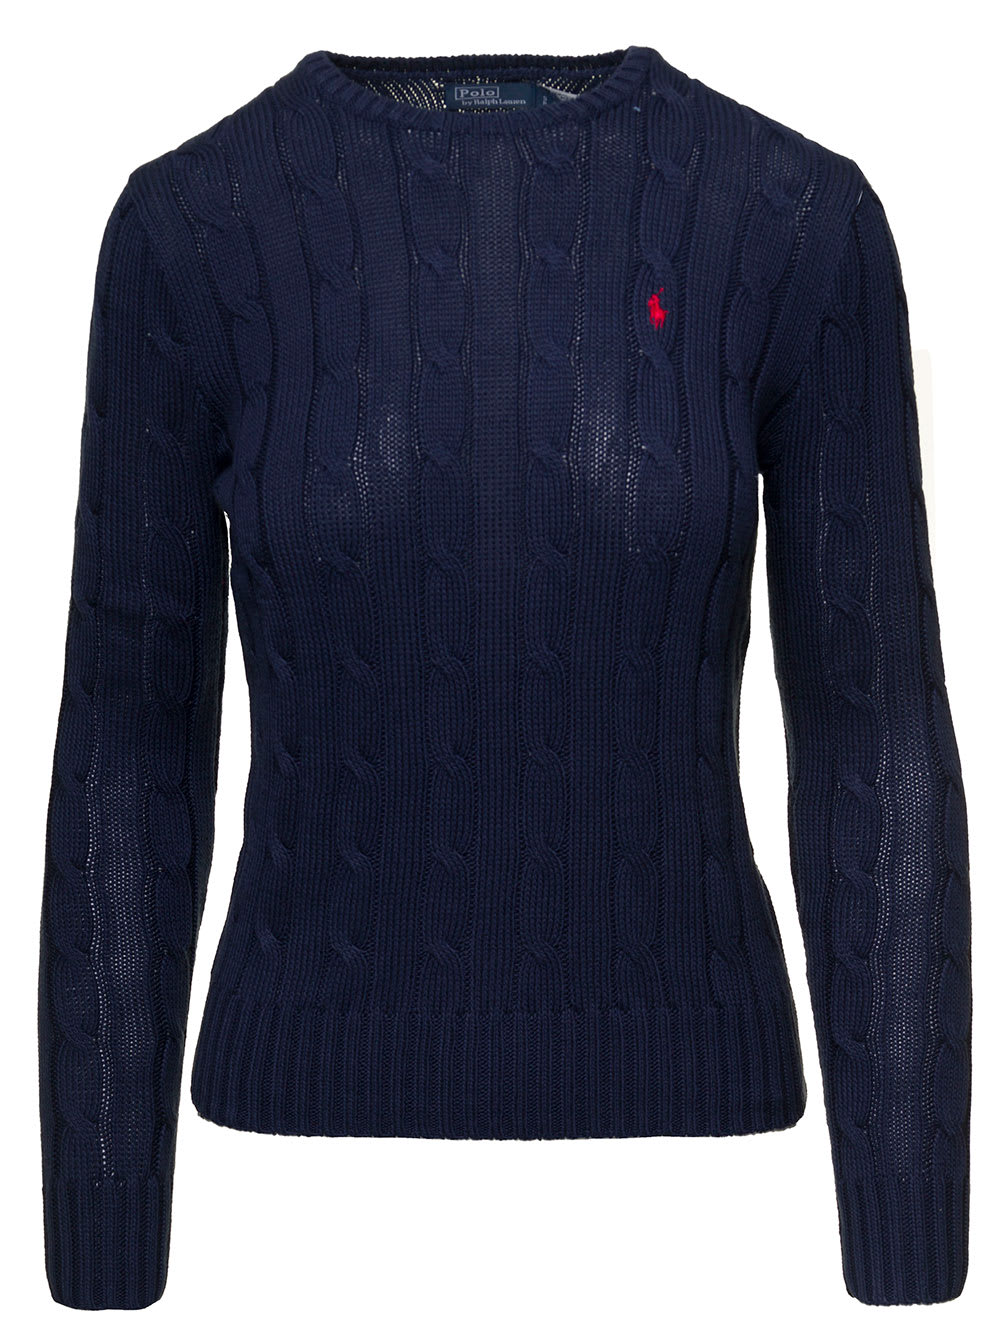 RALPH LAUREN JULIANA BLUE CABLE KNIT PULLOVER WITH CONTRASTING EMBROIDERED LOGO IN COTTON WOMAN